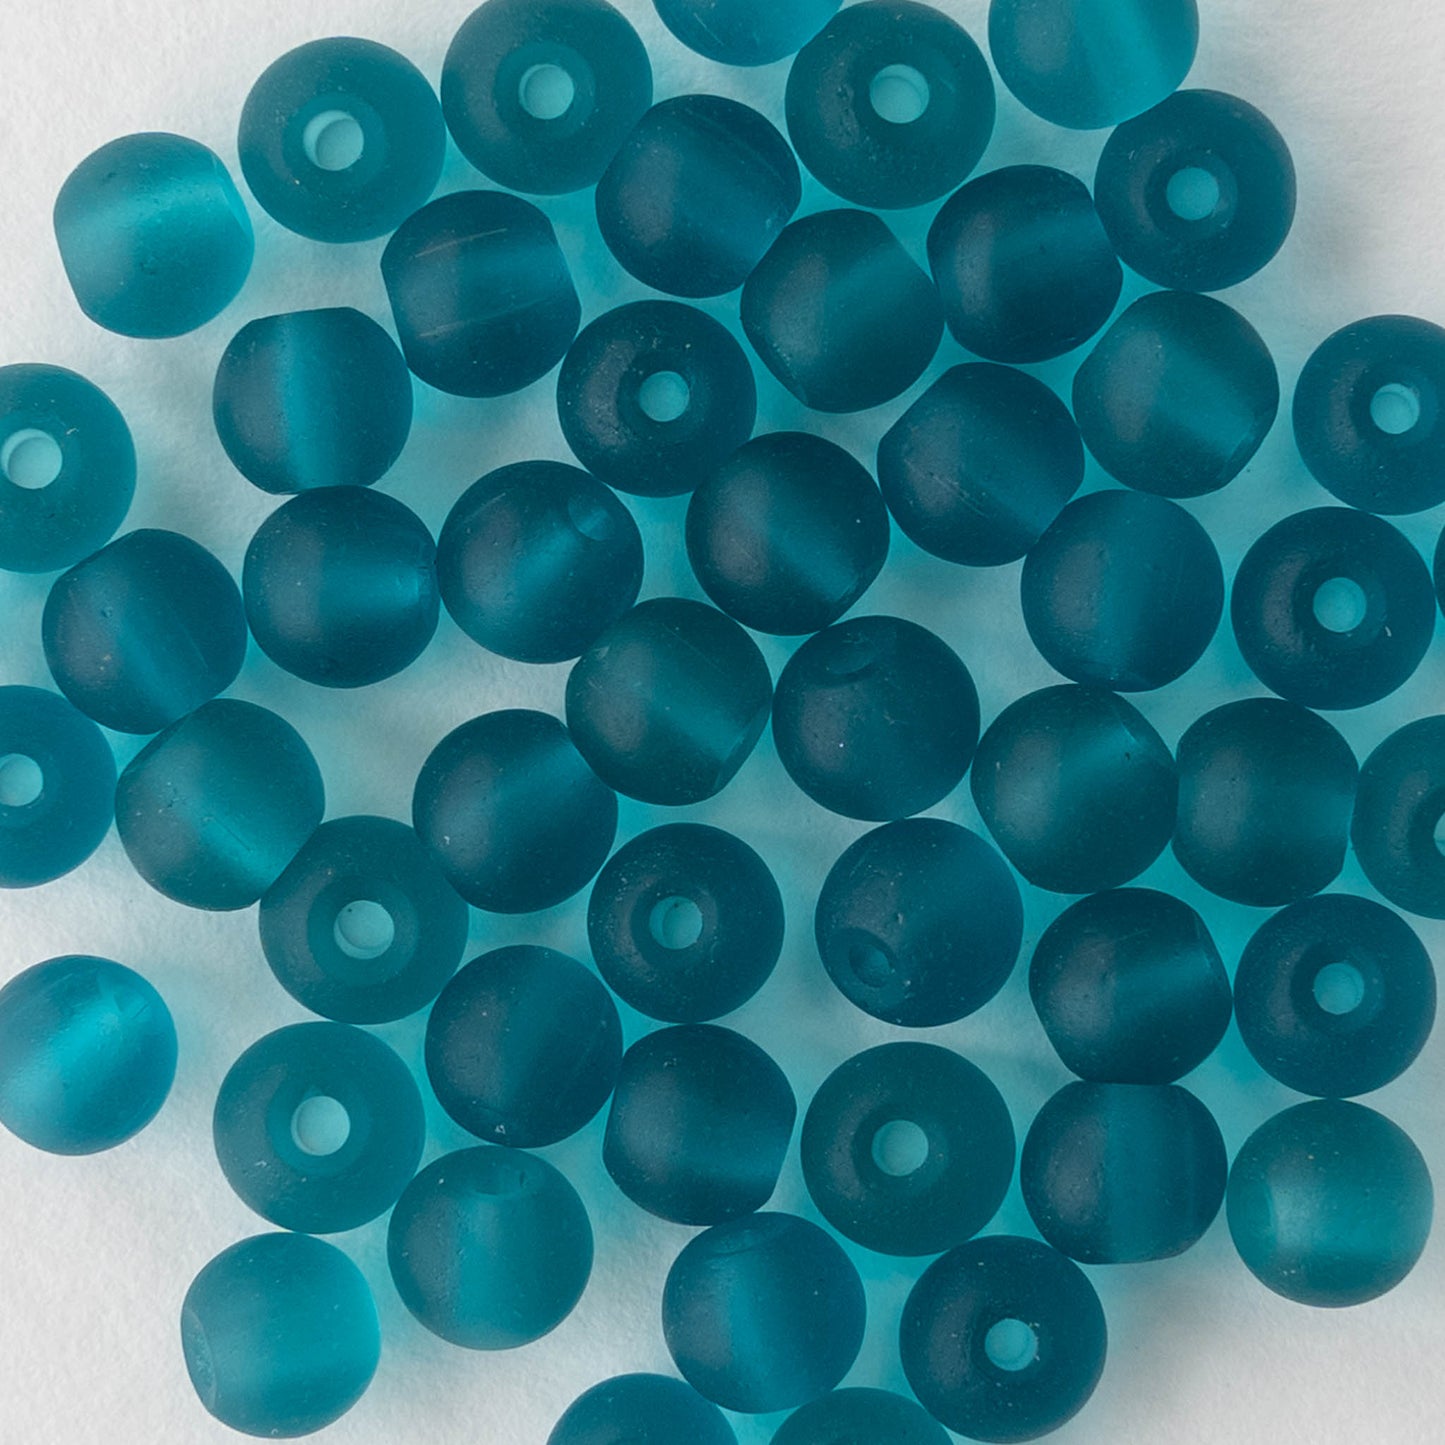 5mm Frosted Glass Rounds - Dark Teal - 16 Inches